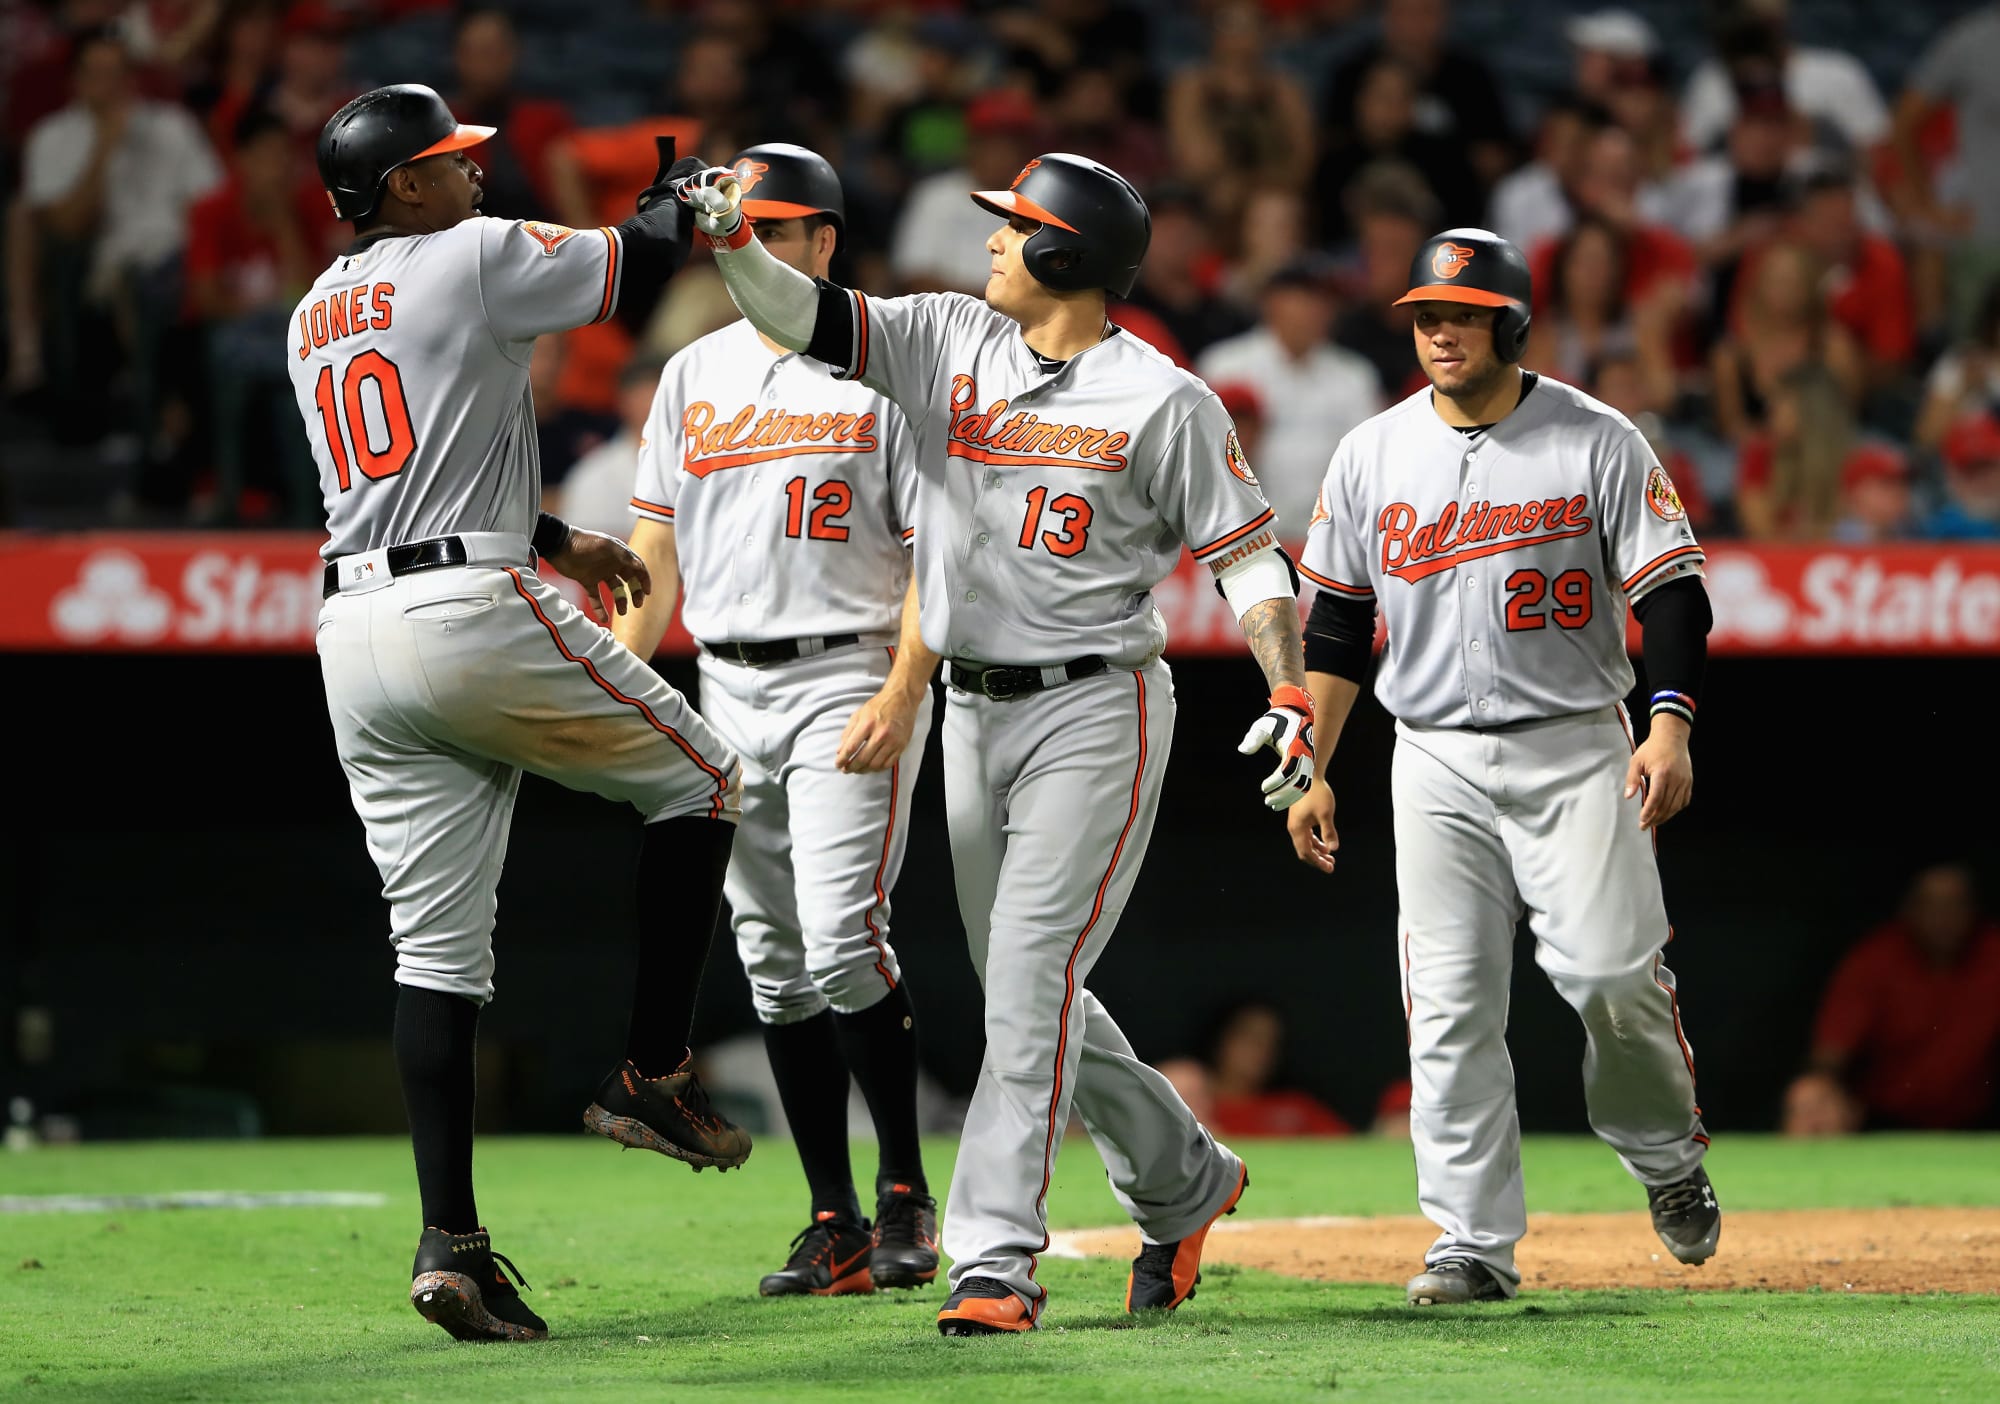 MLB Players Weekend: Full guide to Baltimore Orioles nickname jerseys